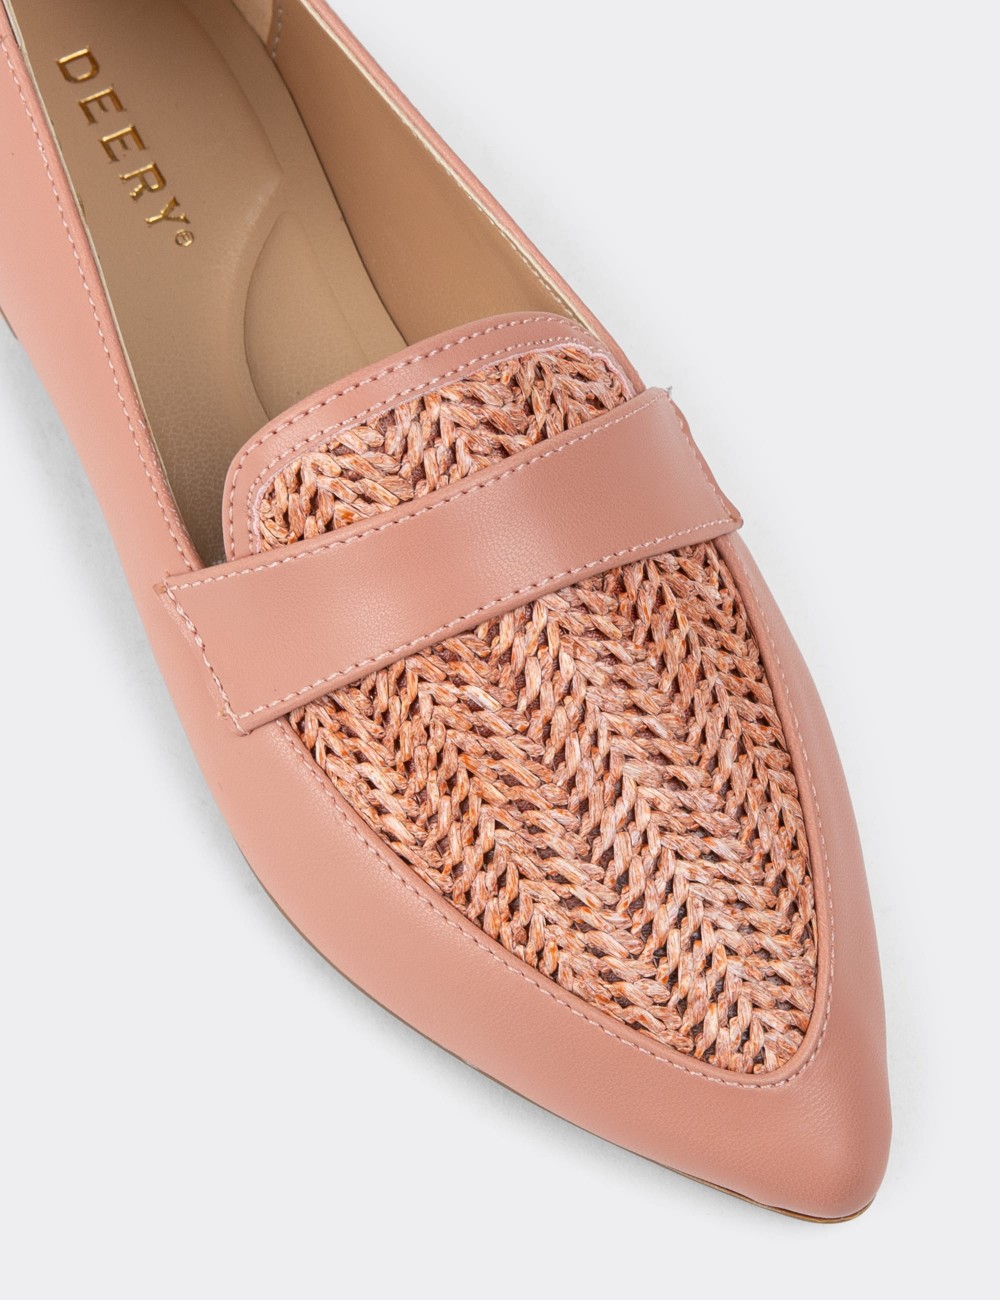 Pink Loafers - 38602ZPDRC01